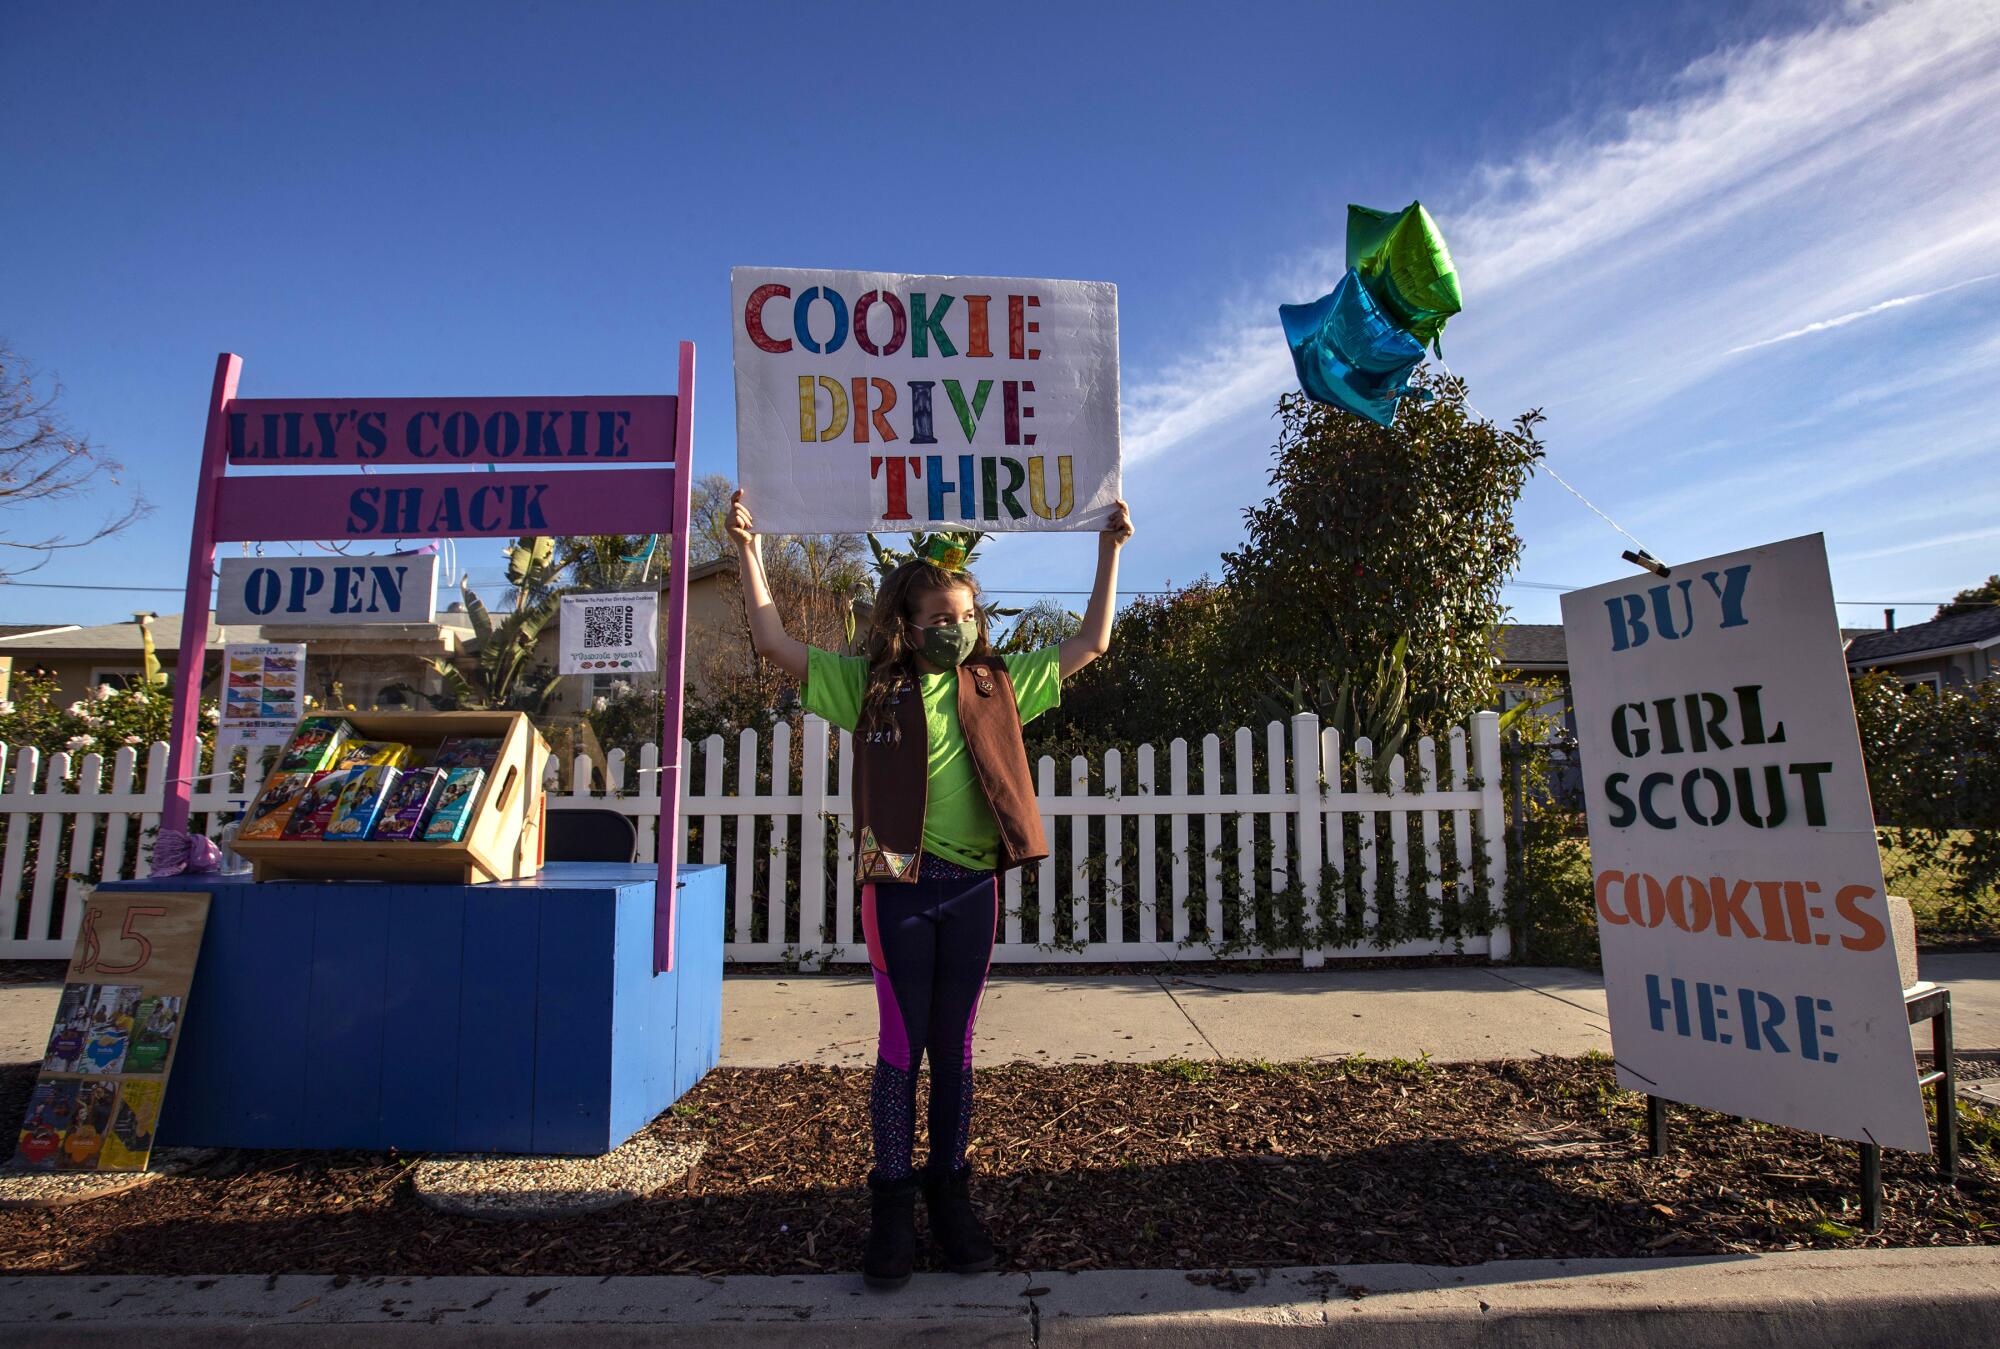 A girl in a Brownie vest holds up a sign that says "Cookie Drive Thru."